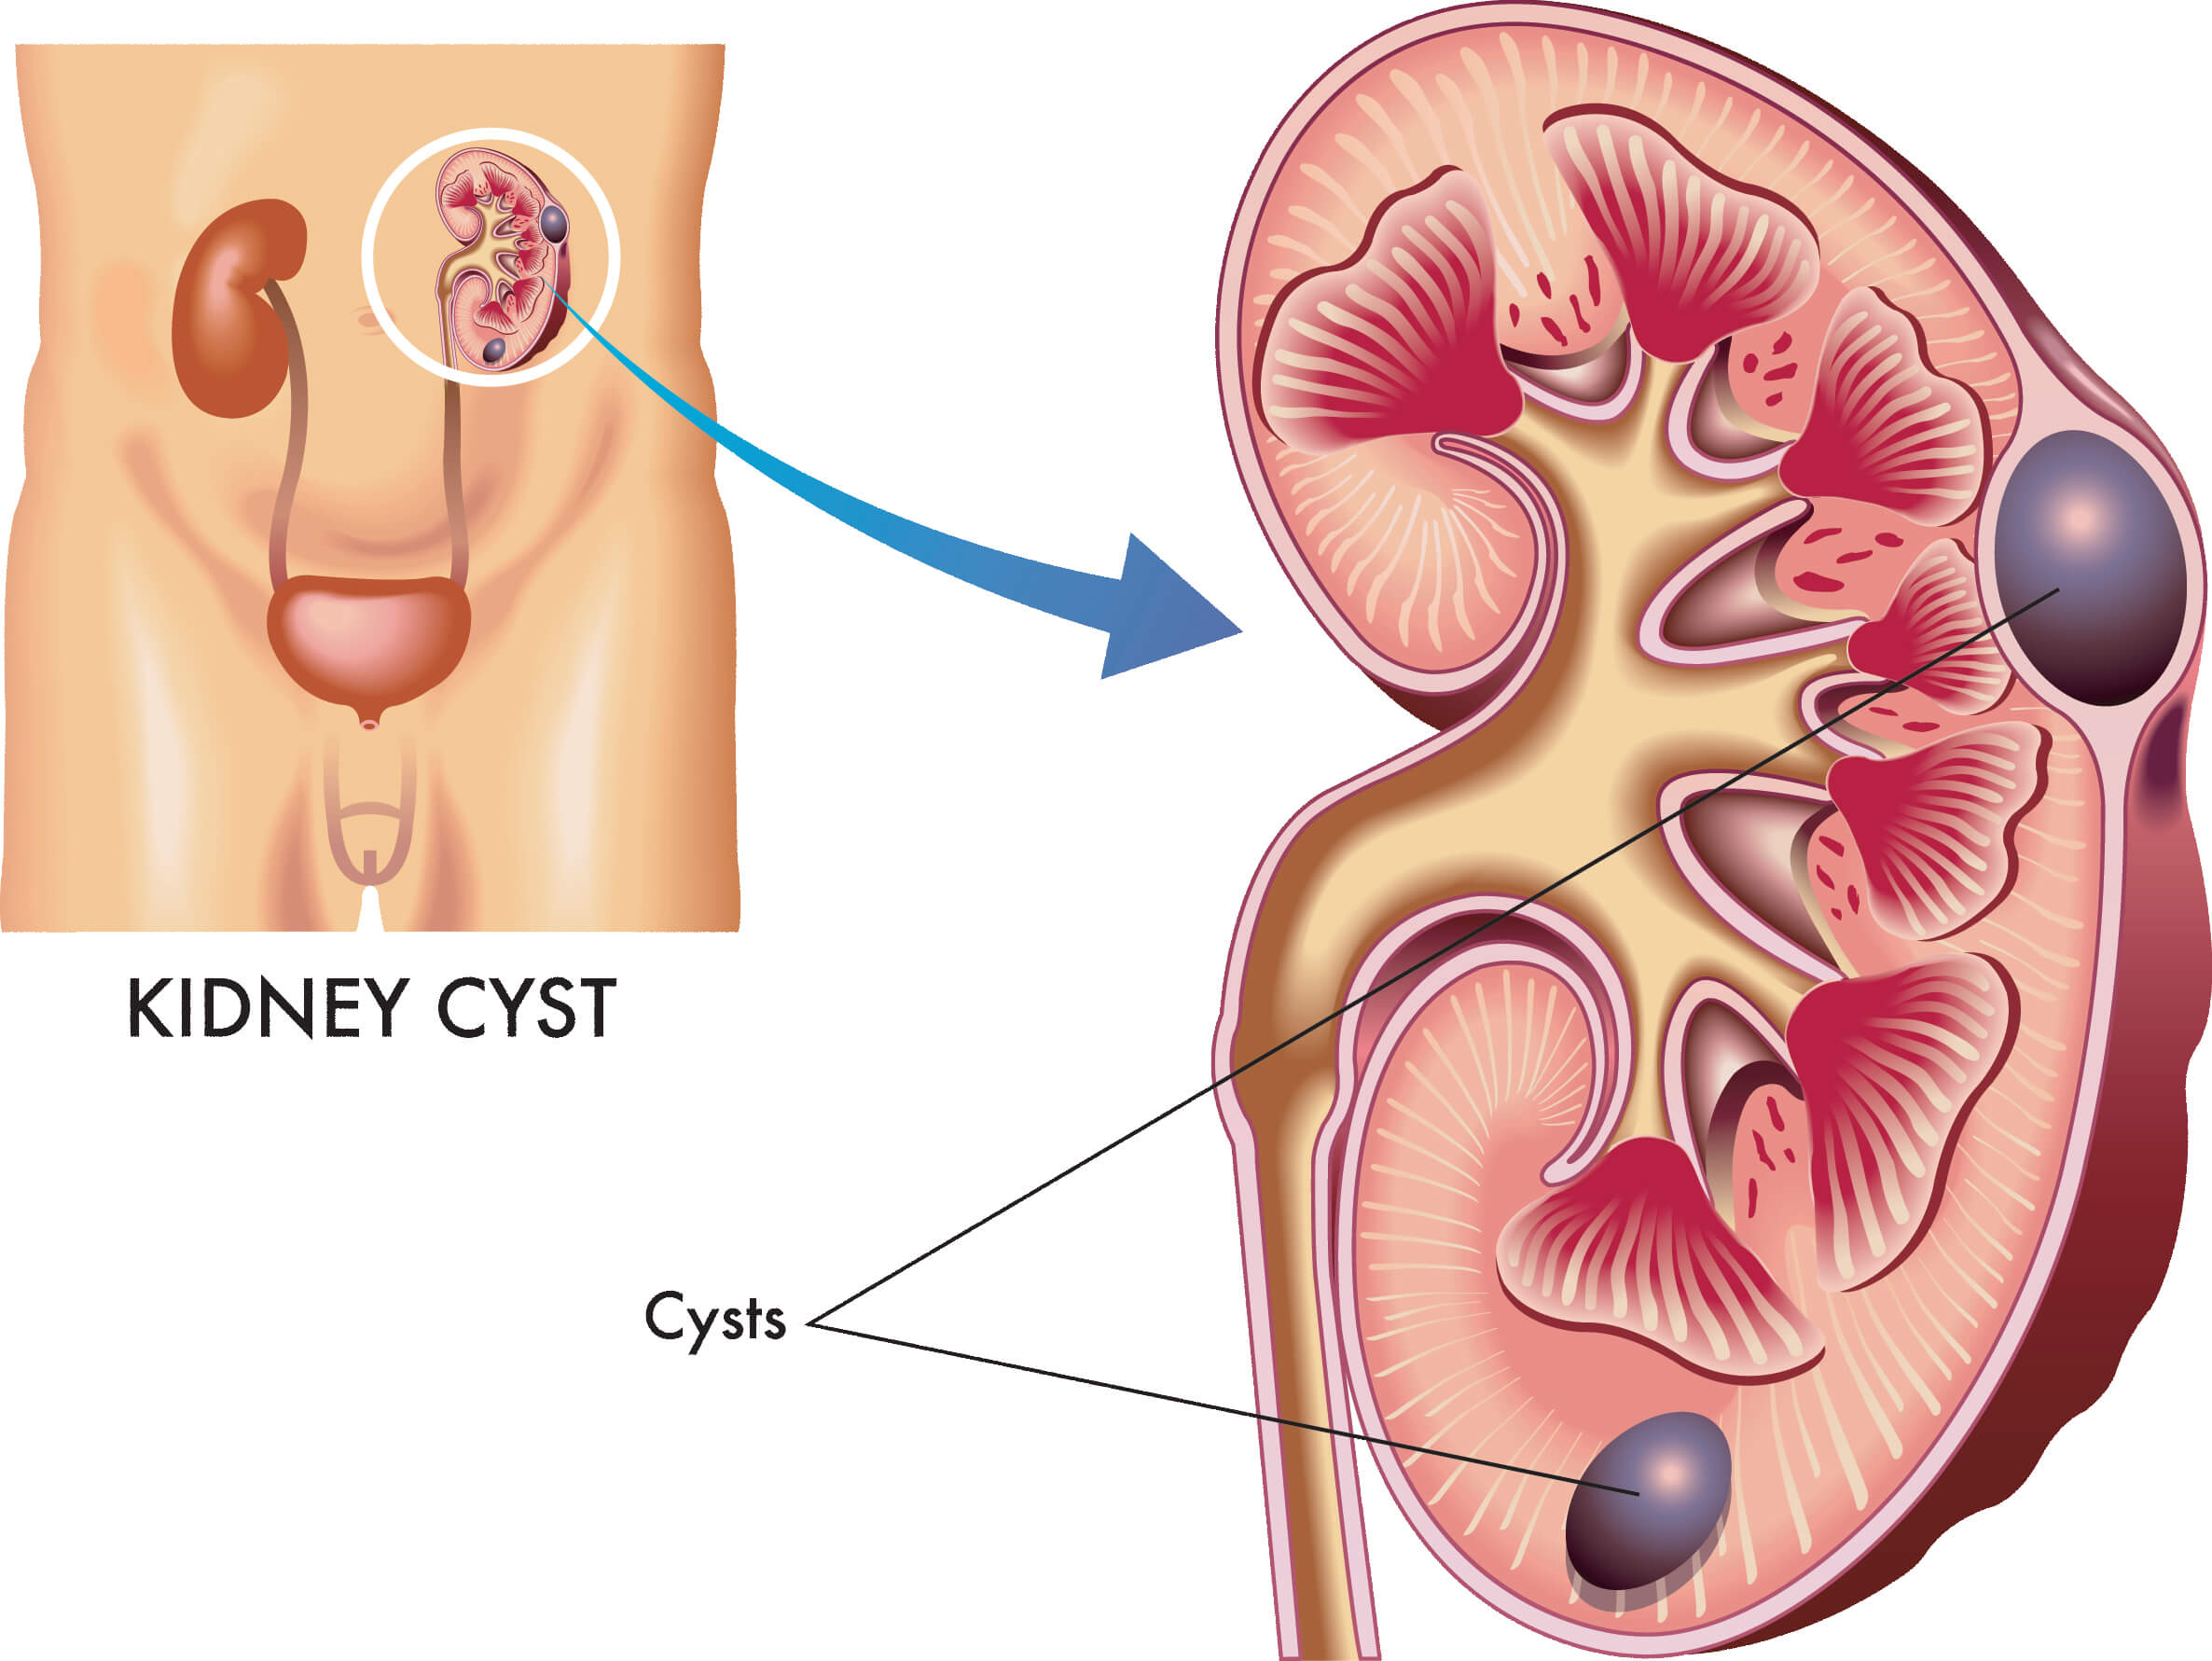 Expert Guidance on Simple Kidney Cysts by Dr. Juan S. Pico